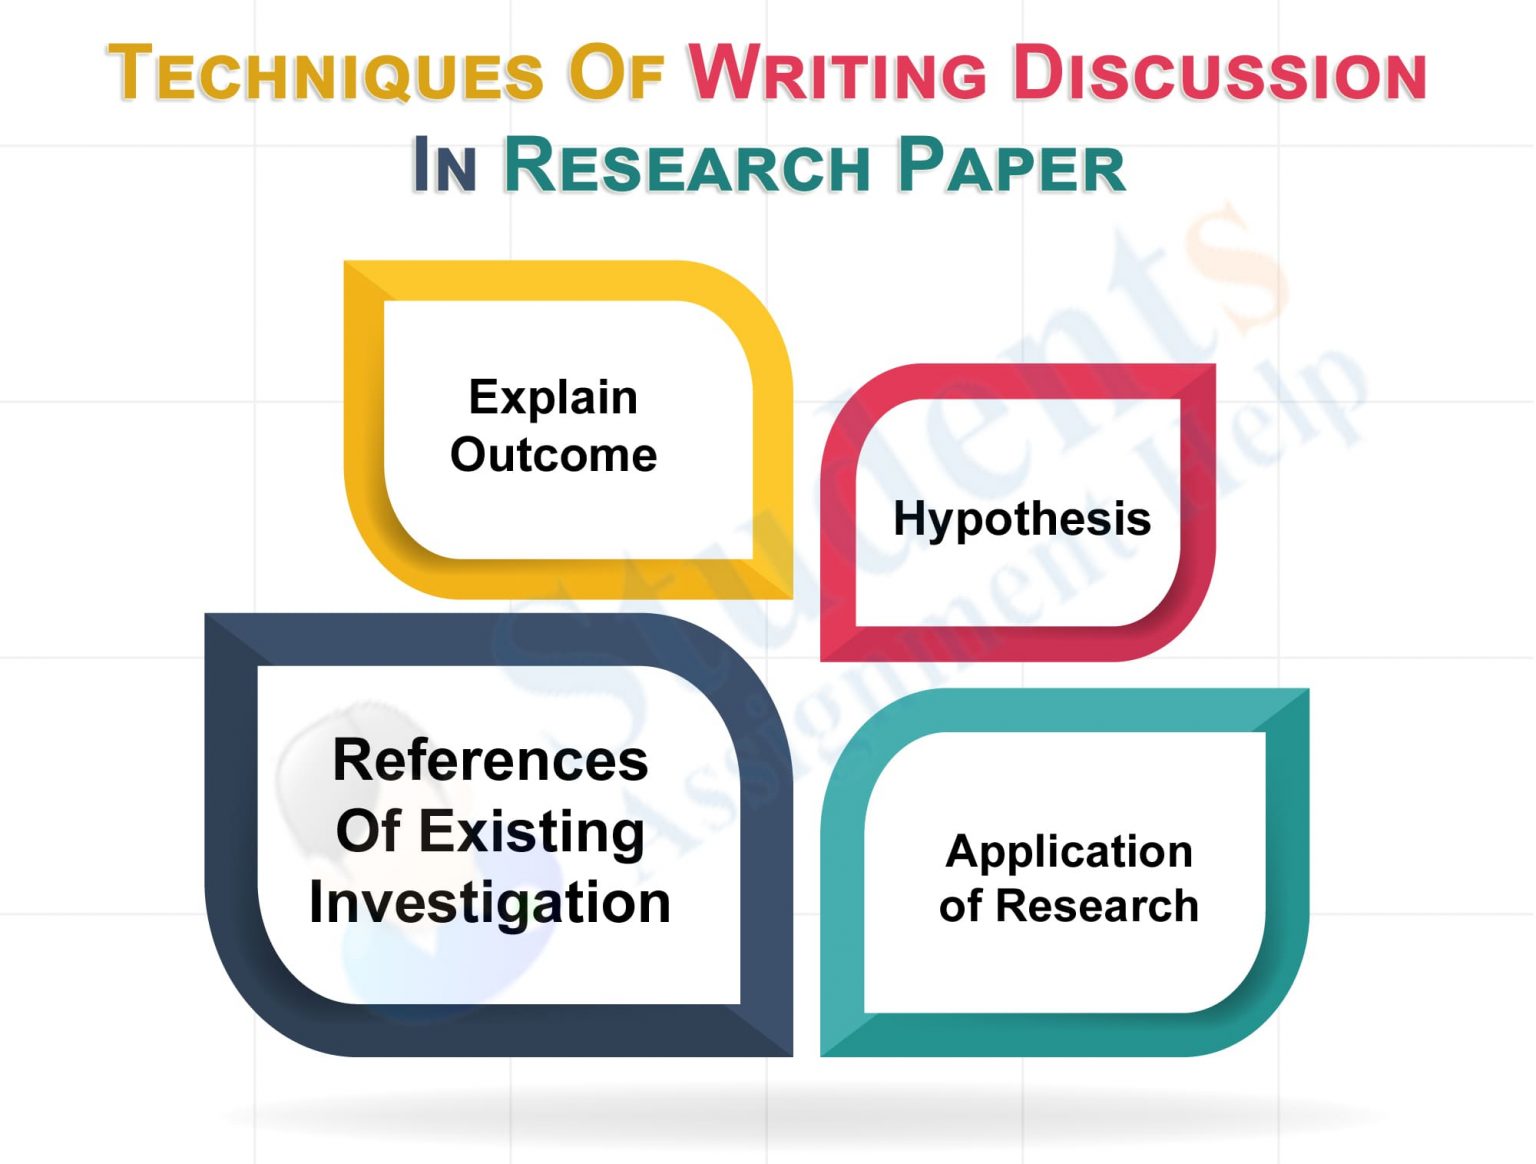 what is the purpose of discussion in research paper